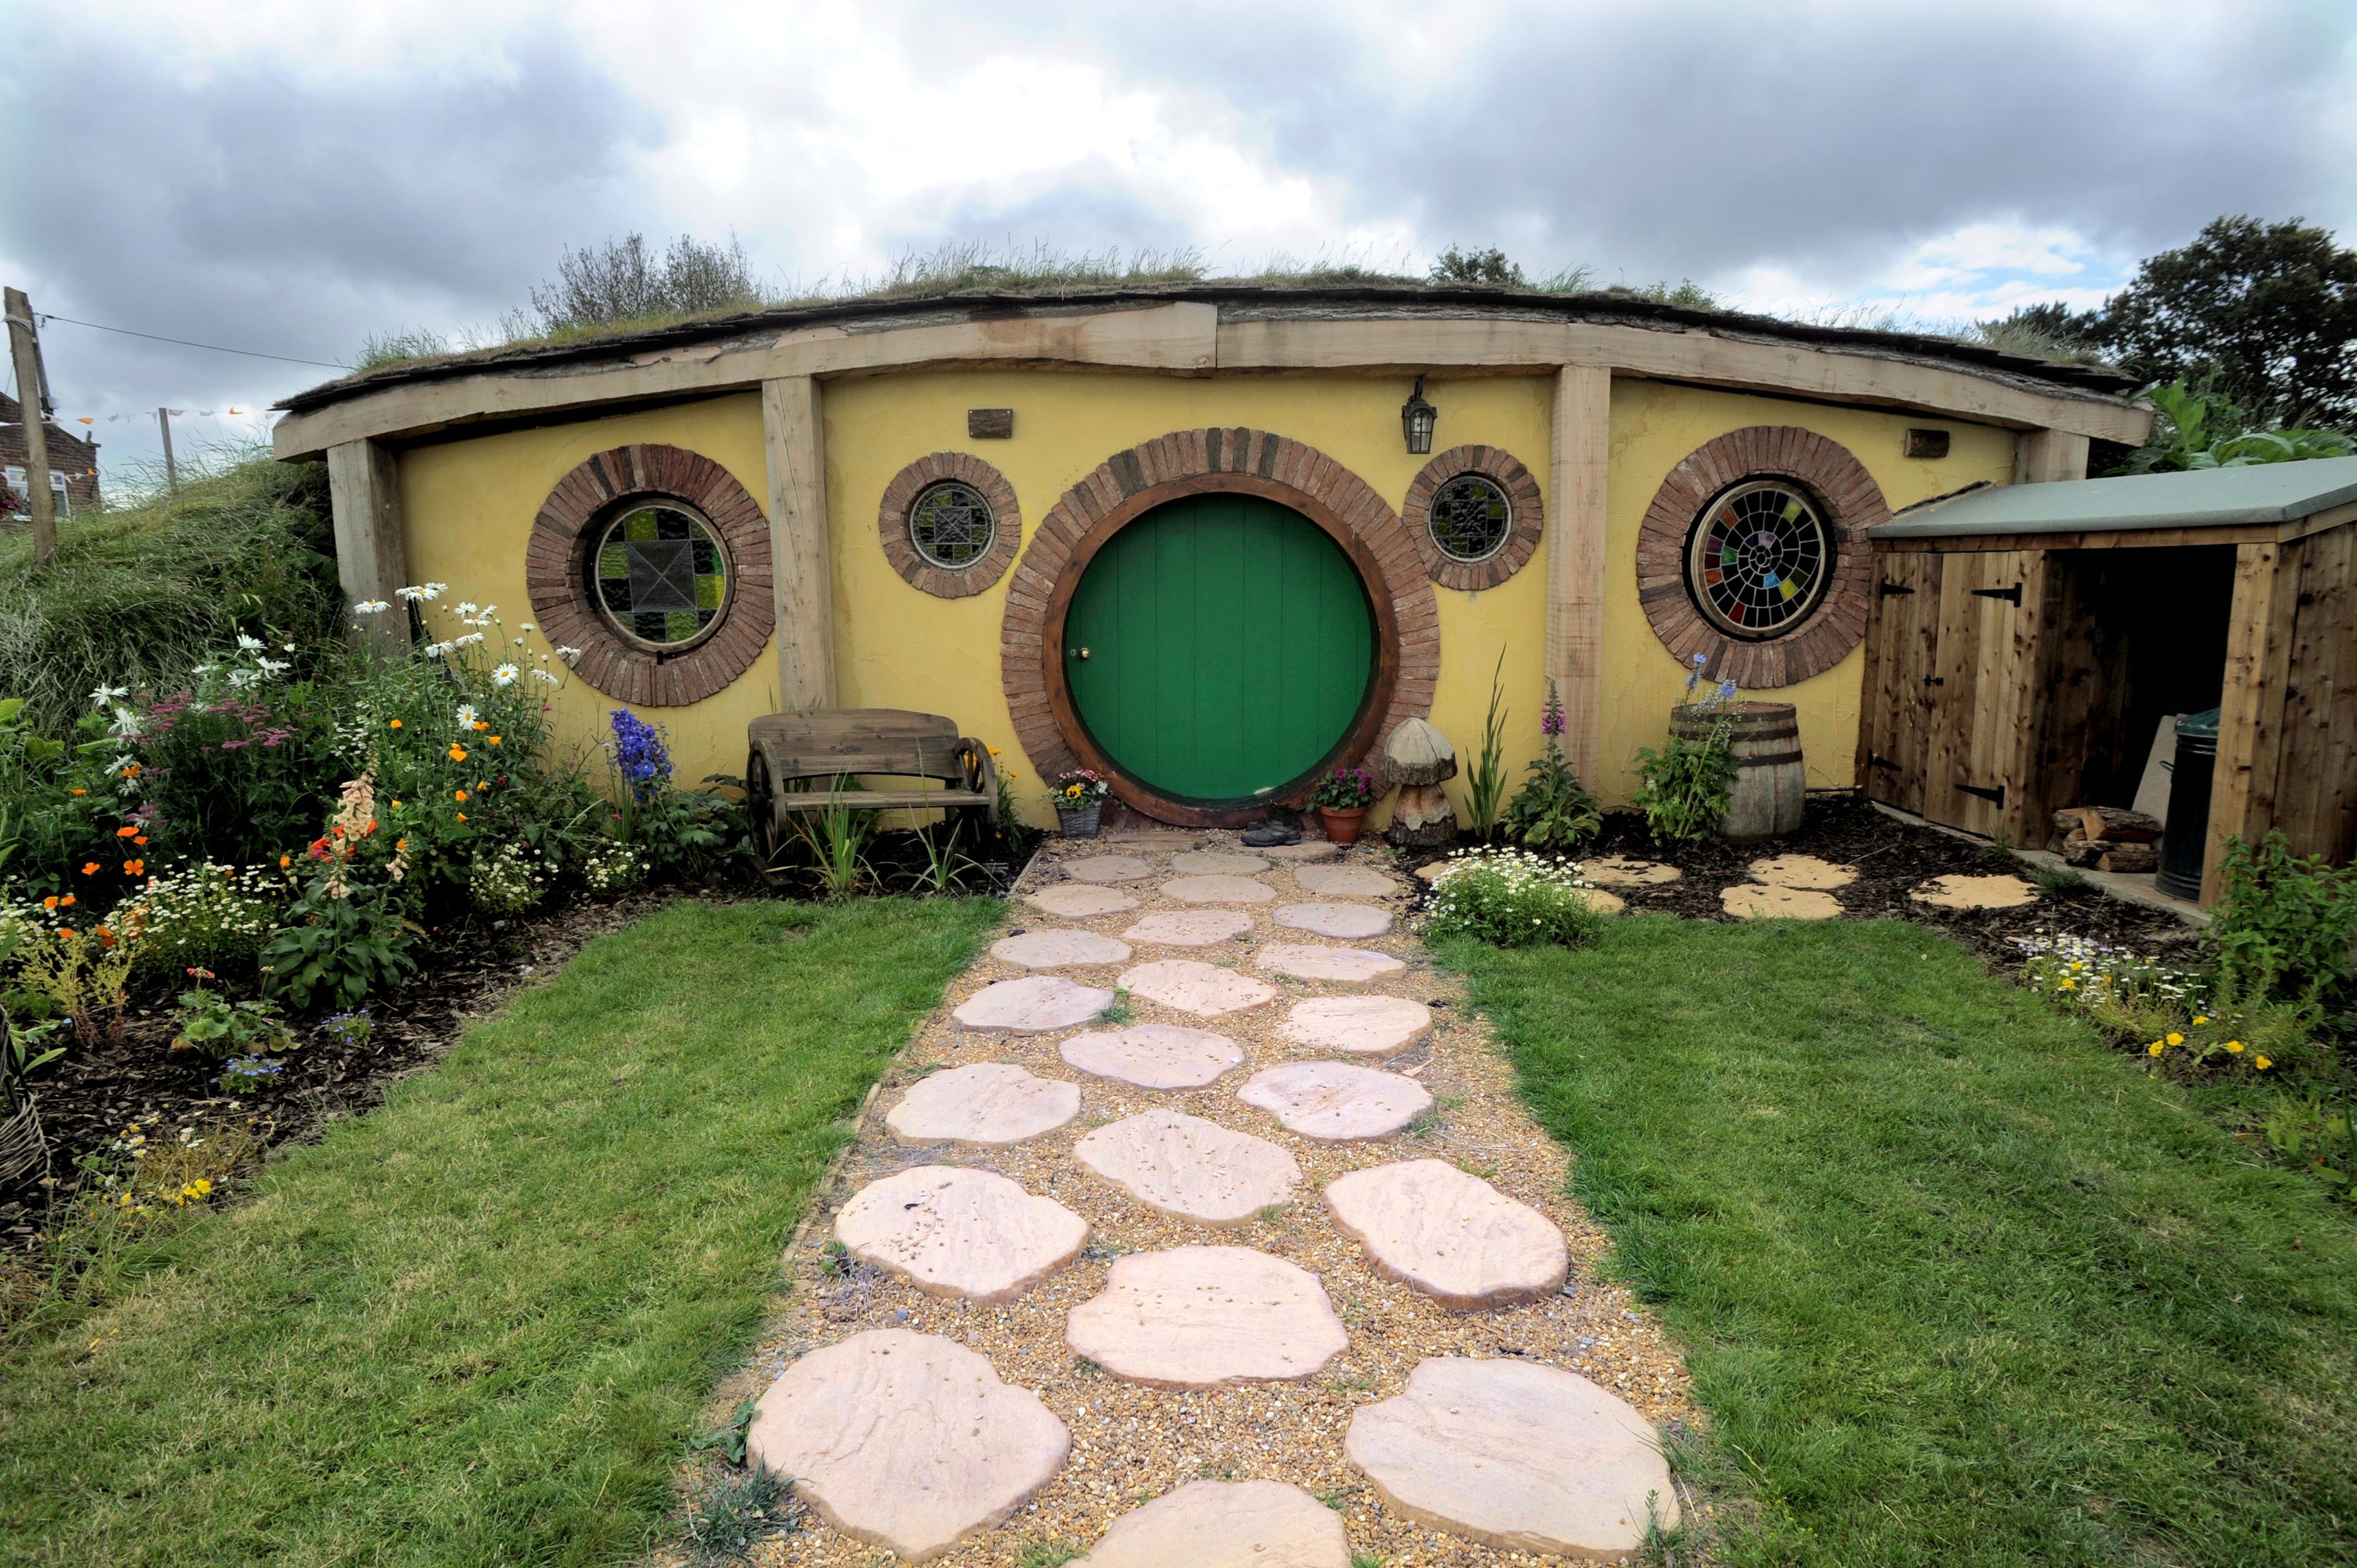 Hobbit holiday home brings the Shire to Yorkshire